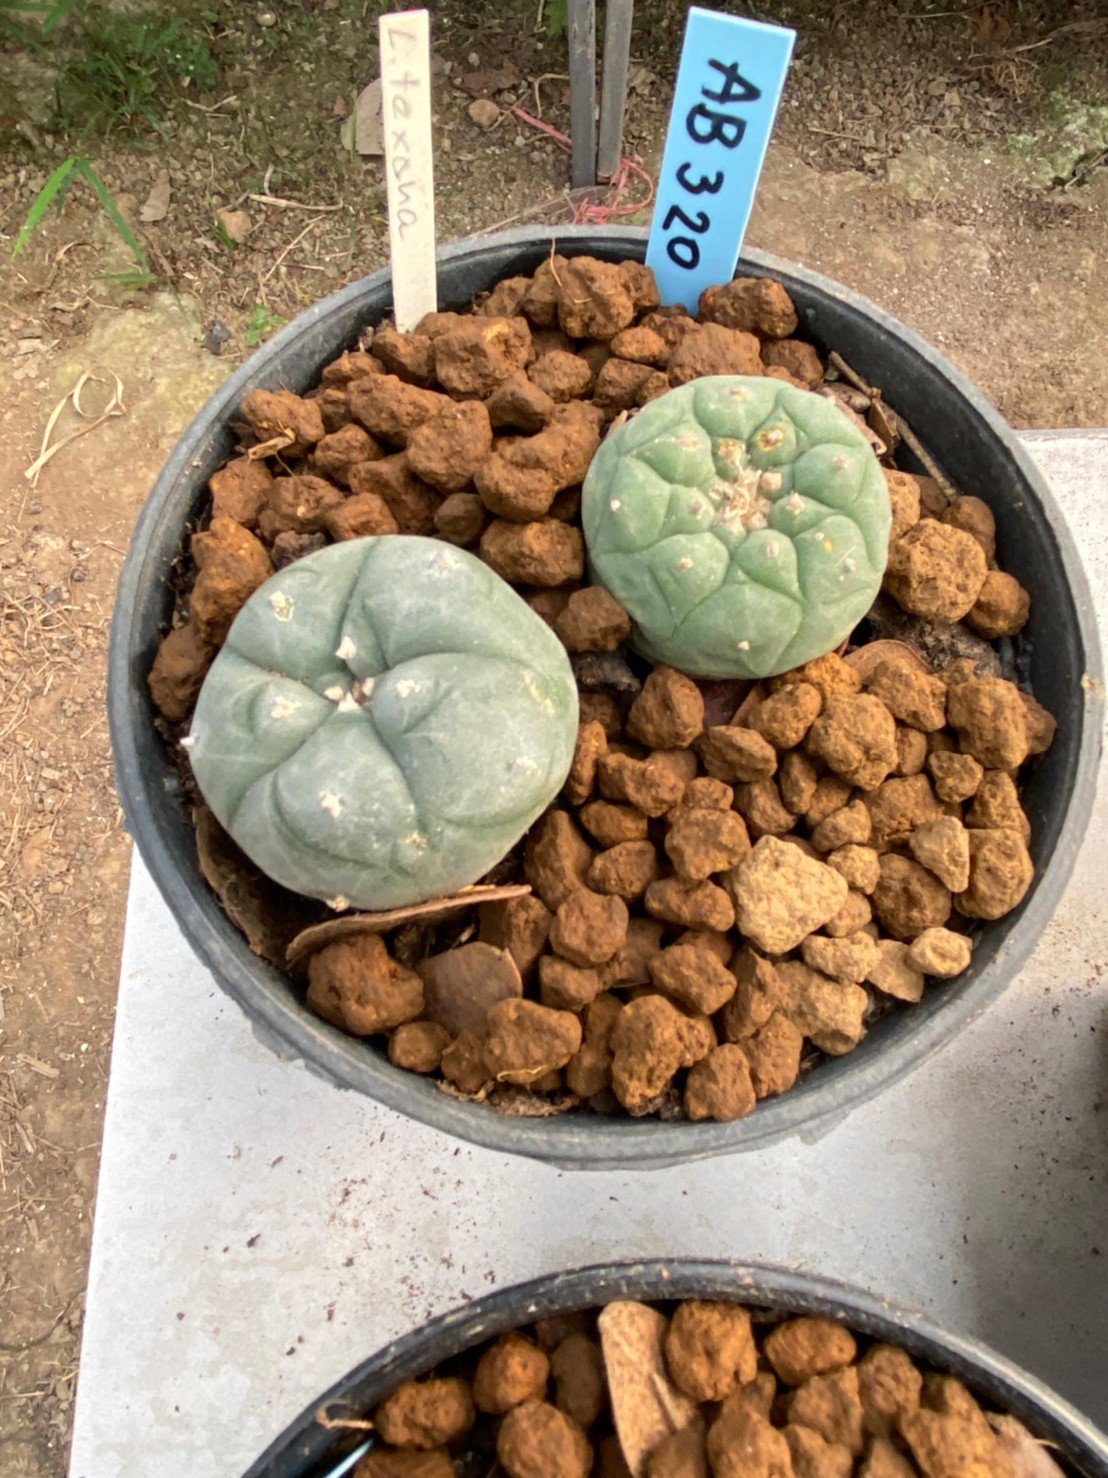 Lophophora williamsii Texana 3-5 cm 8 years old - ownroot grow from seed give flower(copy)